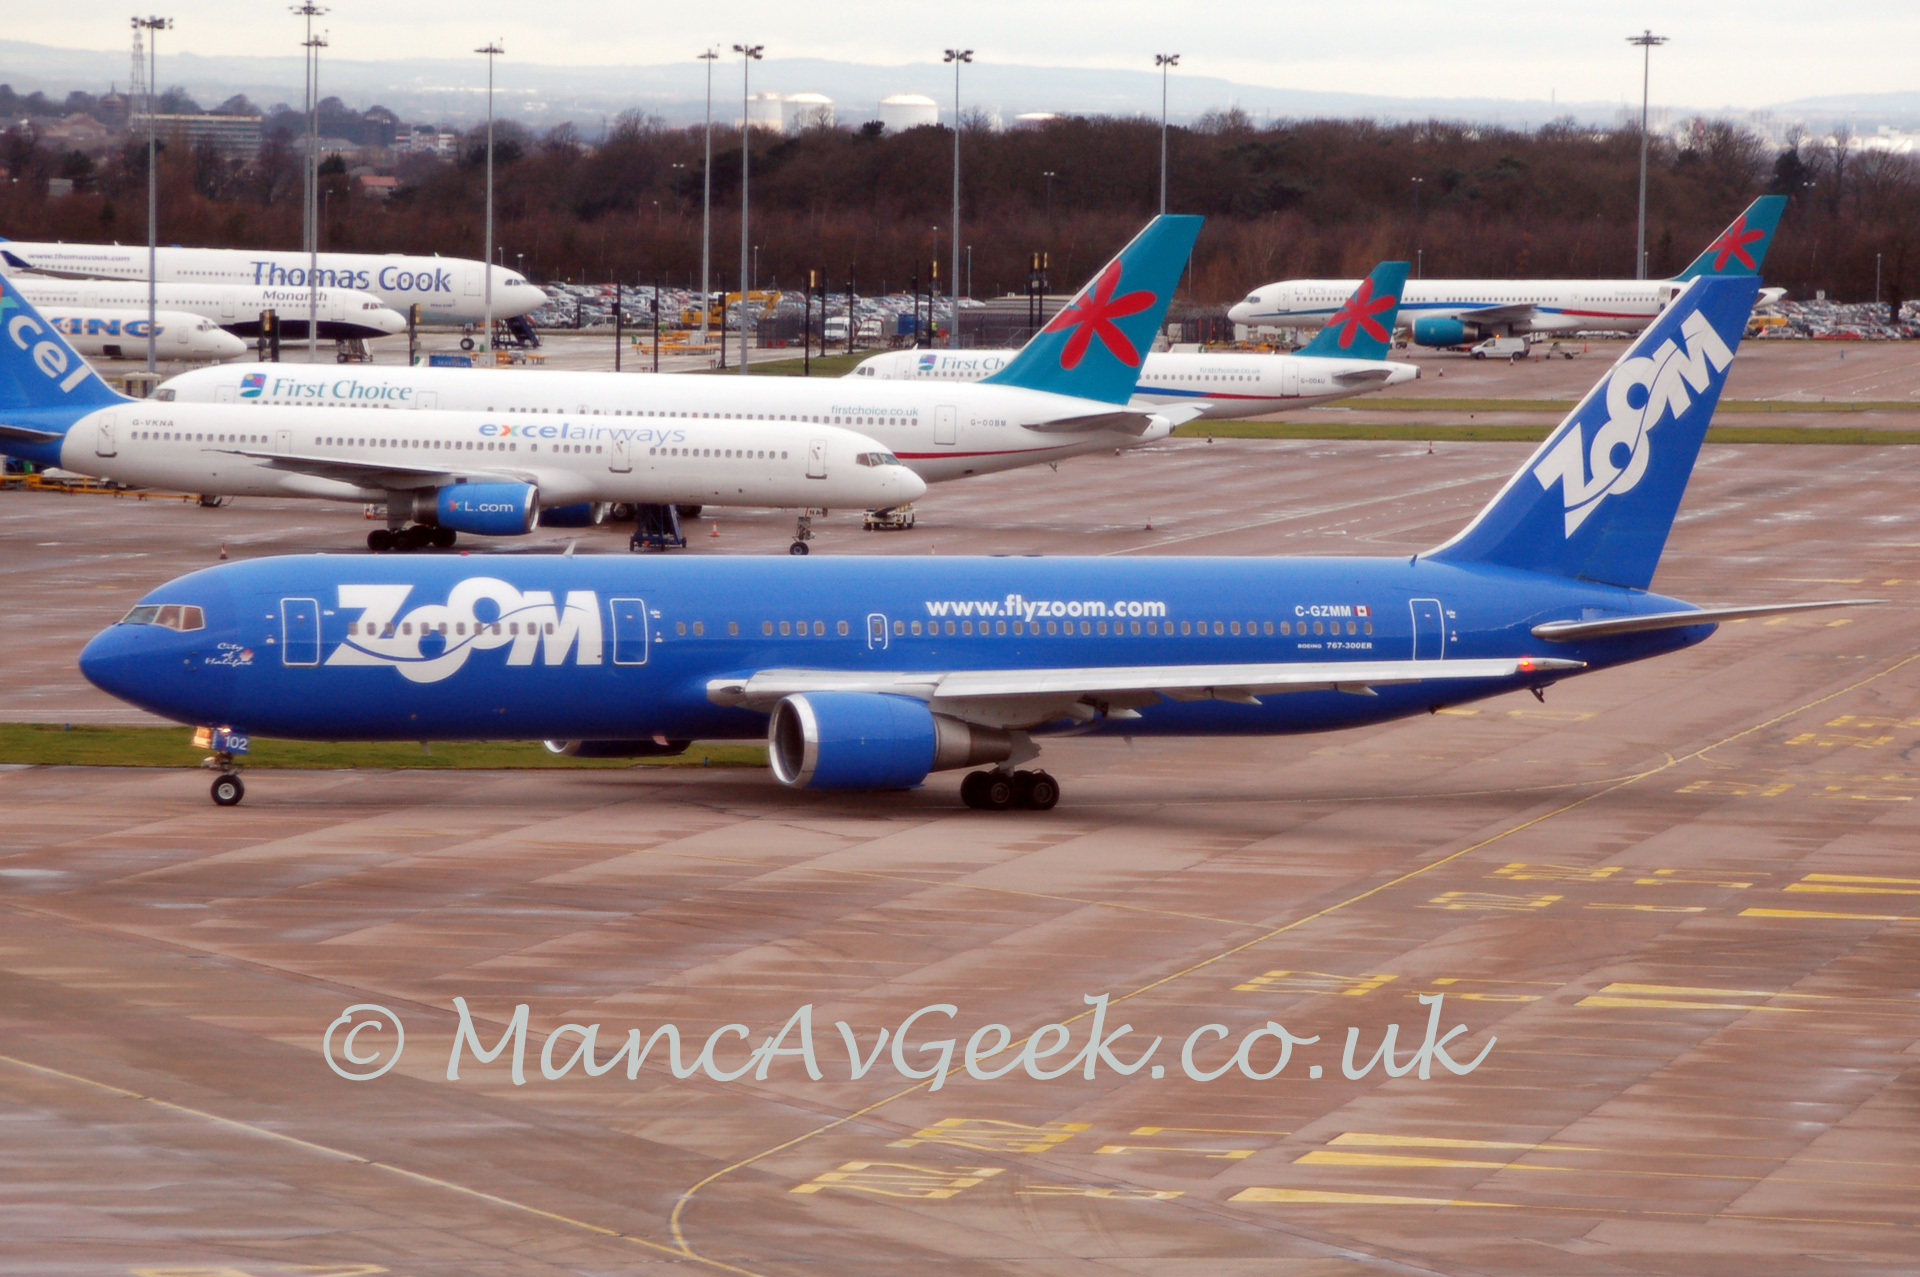 Side view of a twin engined jet airliner taxiing from right to left. The plane is almost entirely blue, with large white billboard-style "Zoom" titles on the forward fuselage, and smaller "www.flyzoom.com" titles on the upper fuselage over the wing, and the registration "C-GZMM" on the upper rear fuselage, next to a Canadian flag (red stripes either side of a white field, with a red maple leaf in the centre). There are large white diagonal "Zoom" titles on the tail. In the background, an array of twin engined airliners are scattered around, nestled among tall lighting poles, with tree marking the edge of the airfield, and an industrial landscape beyond that, under a hazy grey sky.